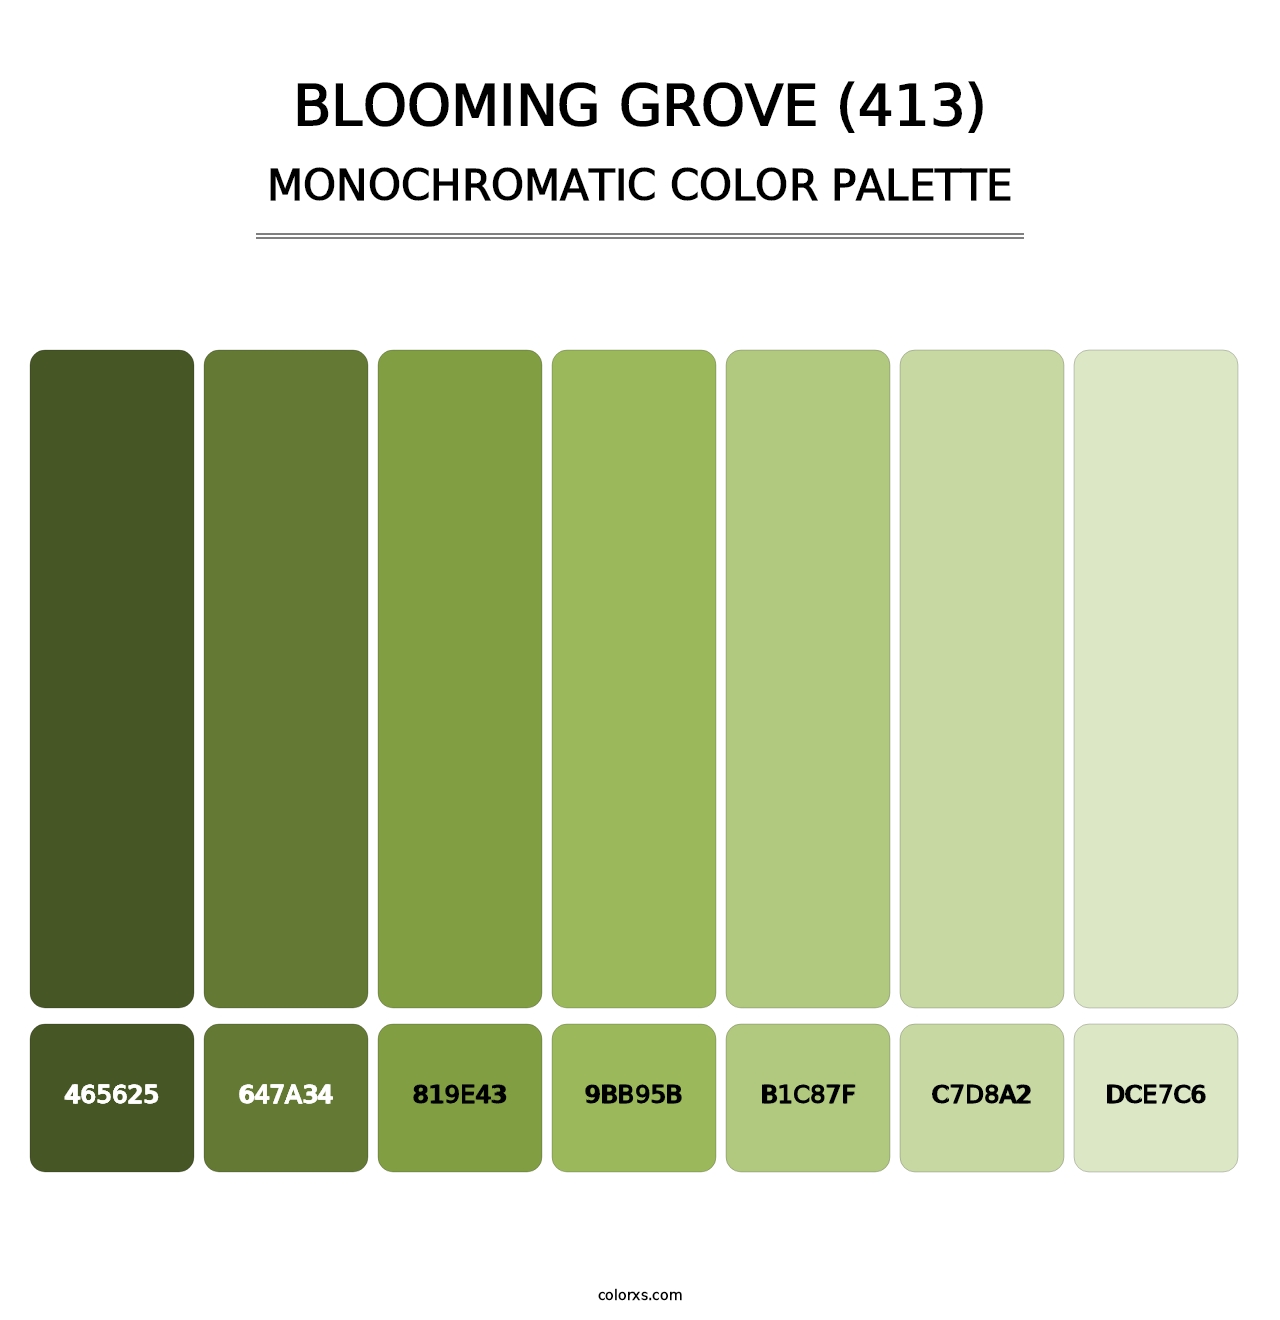 Blooming Grove (413) - Monochromatic Color Palette